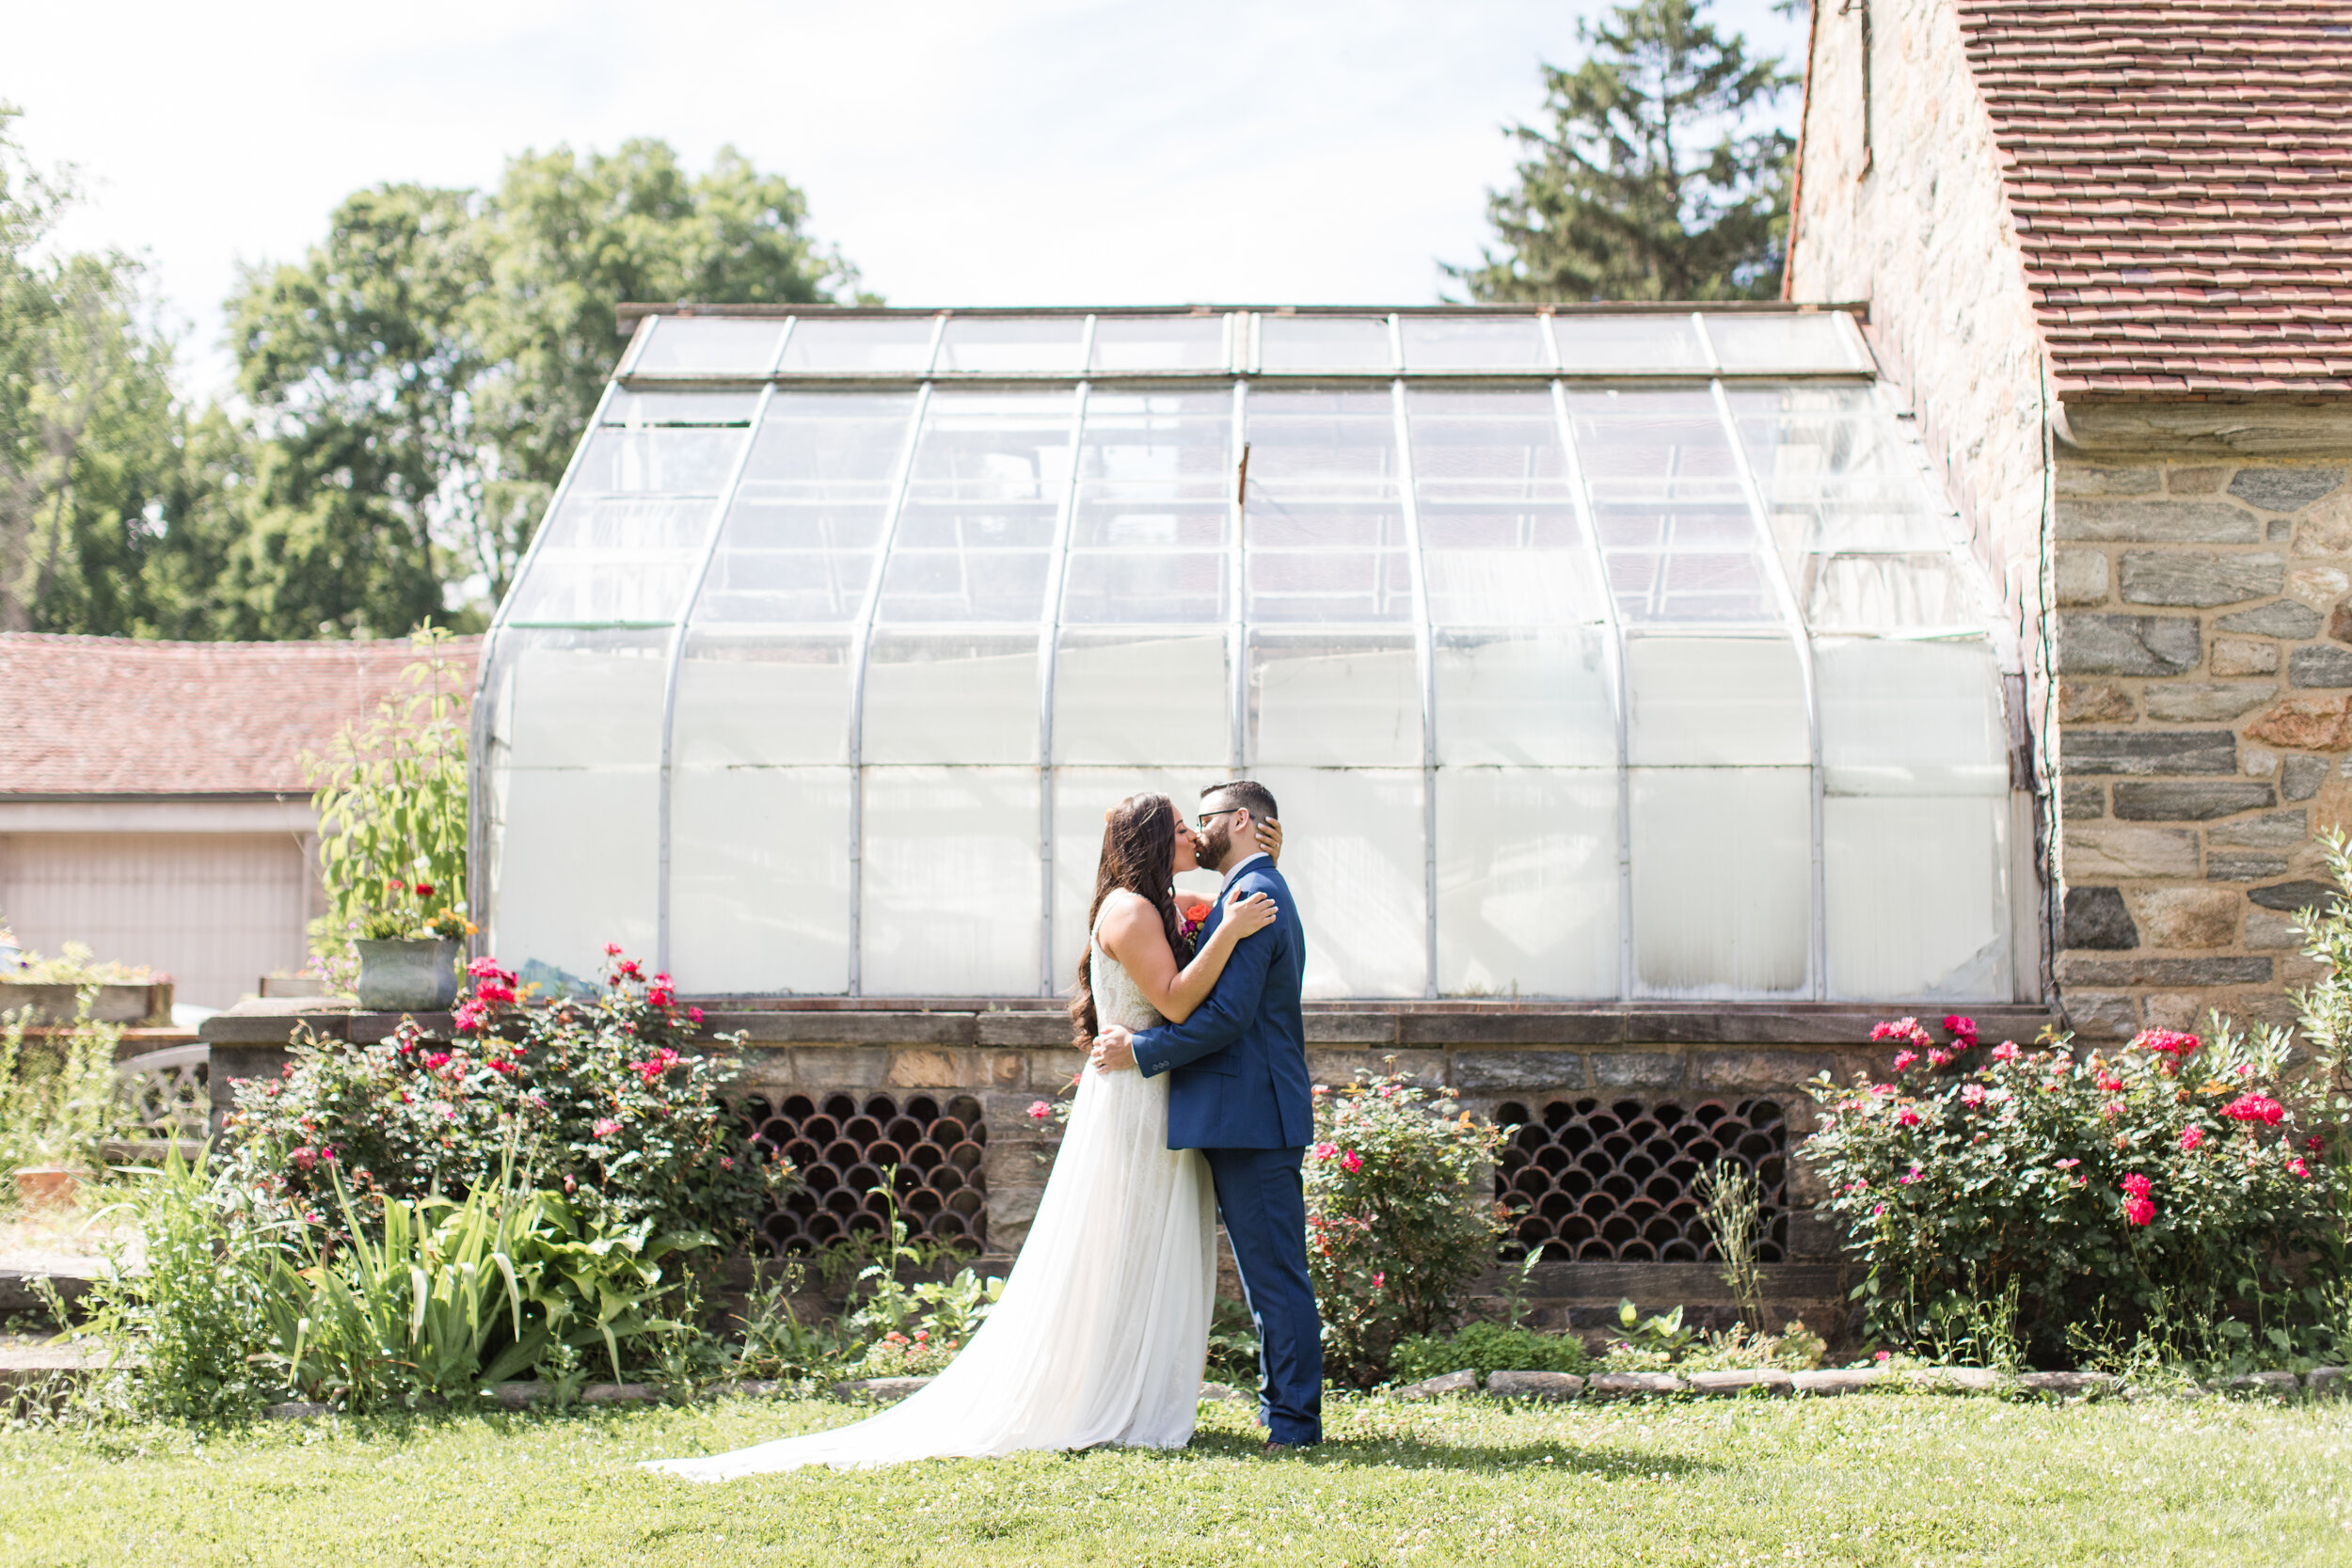 Kelly Pullman photograph photographed this summery whimsical wedding featuring the June Fete Fairgrounds and a reception at Yard’s Brewery in Philadelphia.